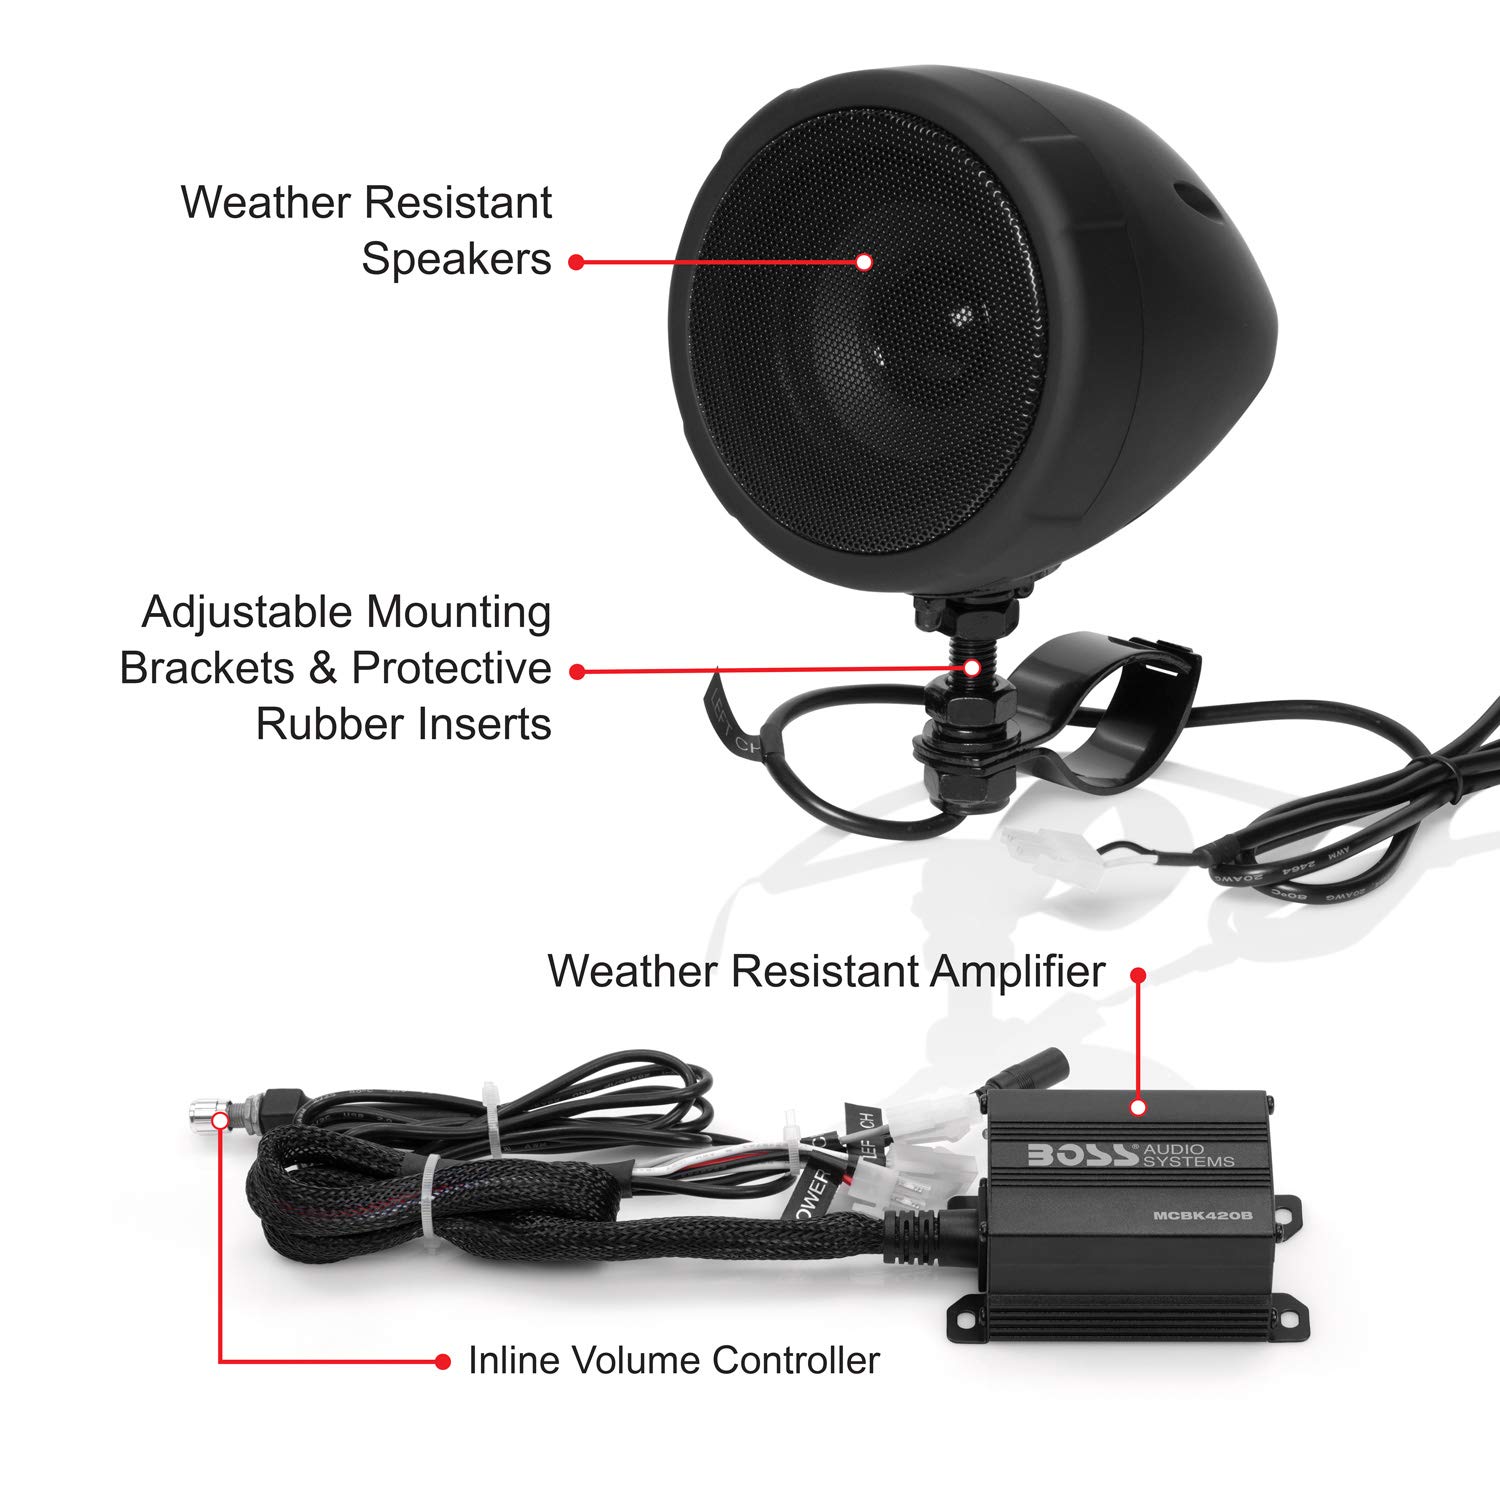 BOSS Audio Systems MCBK420B Bluetooth Speaker System - Class D Compact Amplifier, 3 Inch Weatherproof Speakers, Volume Control, Great for Use with ATVs/Motorcycles, 12 Volt Vehicles